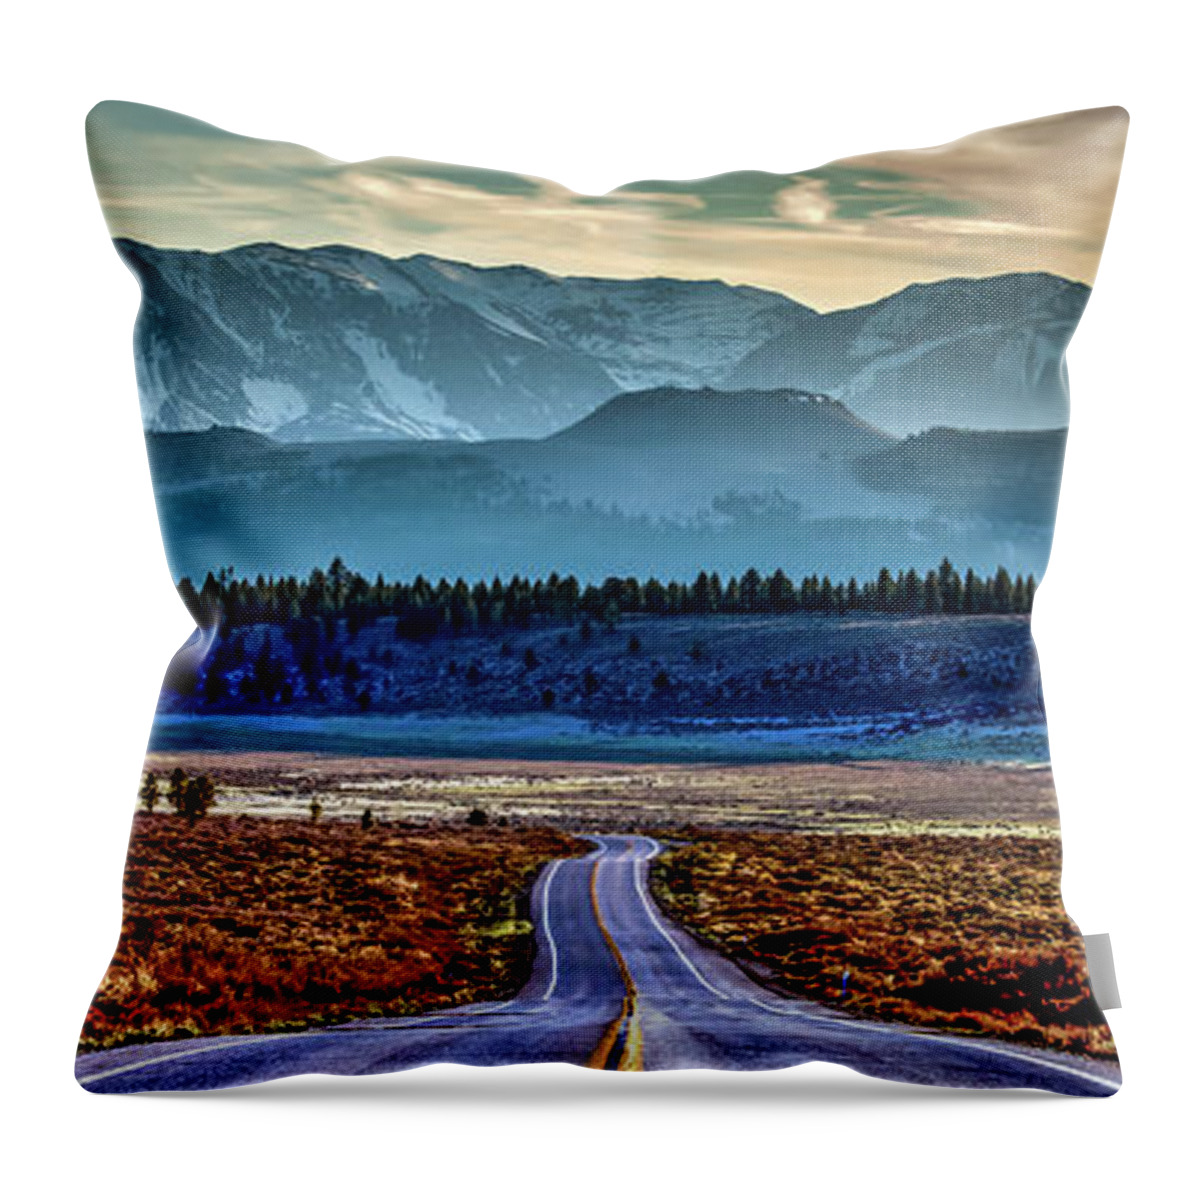 White Peak Mountains Throw Pillow featuring the photograph View From A Windy Road by Az Jackson